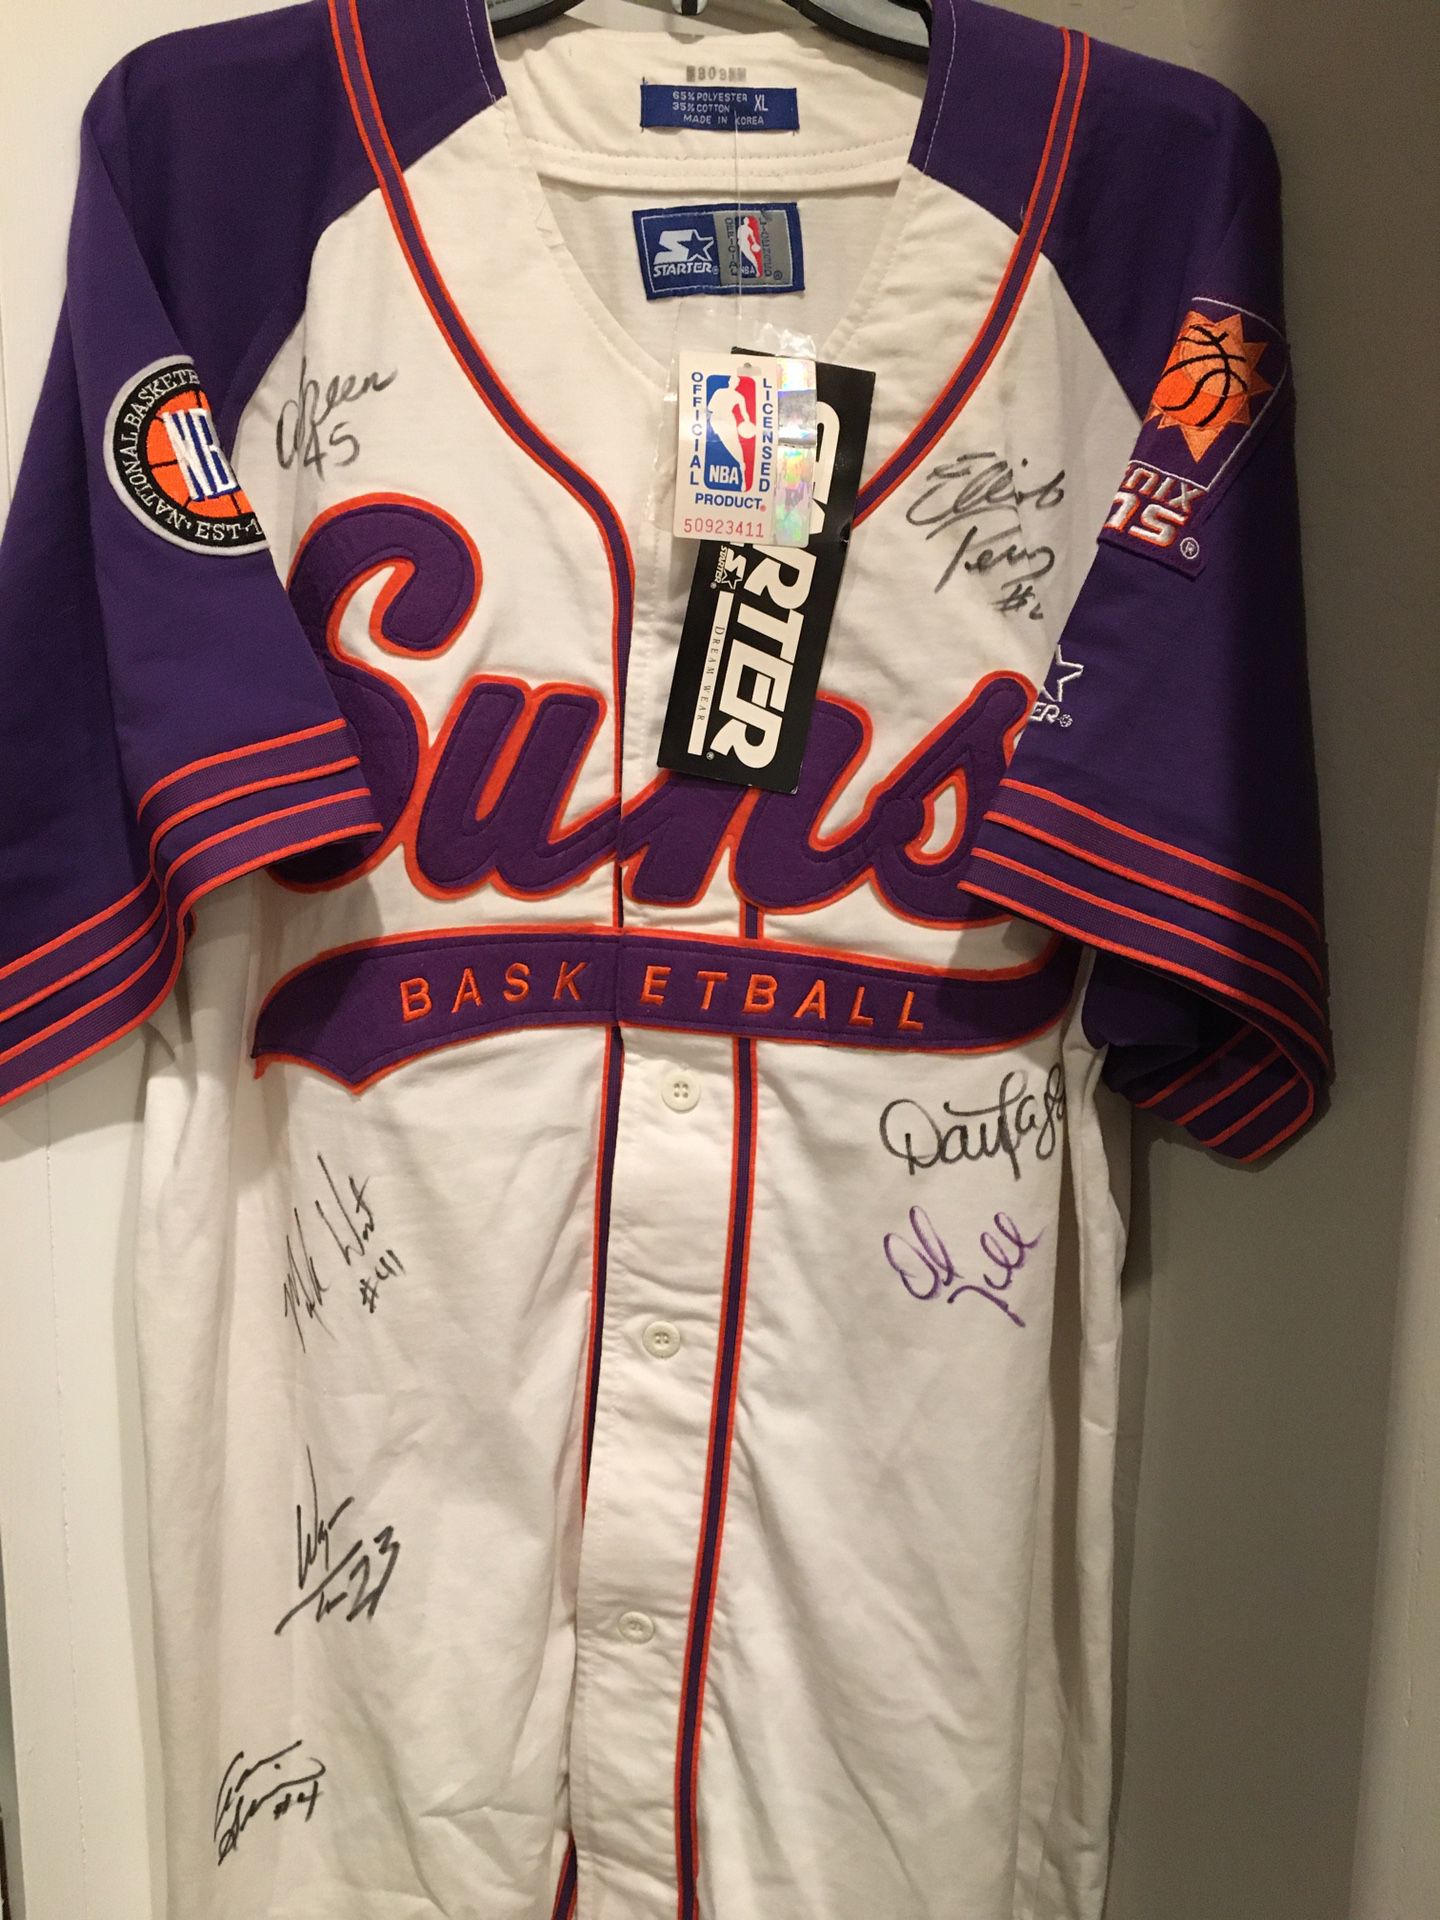 Official NFL, NBA and Soccer Autographed Jerseys